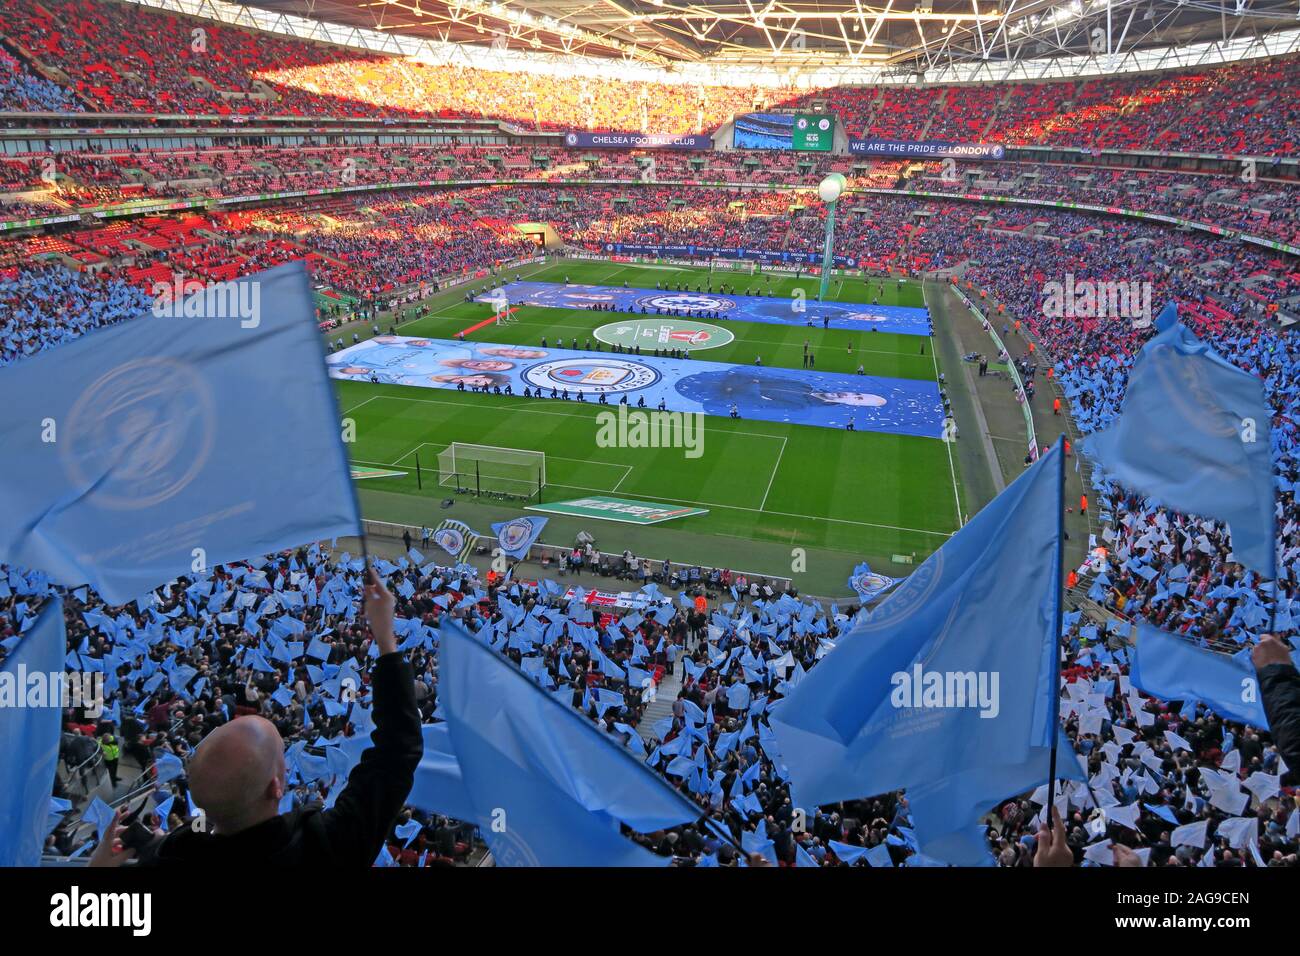 MCFC, Manchester City, Manchester City Football Club vs Chelsea, Carabao Cup Finale 24/02/2019 Wembley Stadion, London, England, UK-Feb 2019 Stockfoto